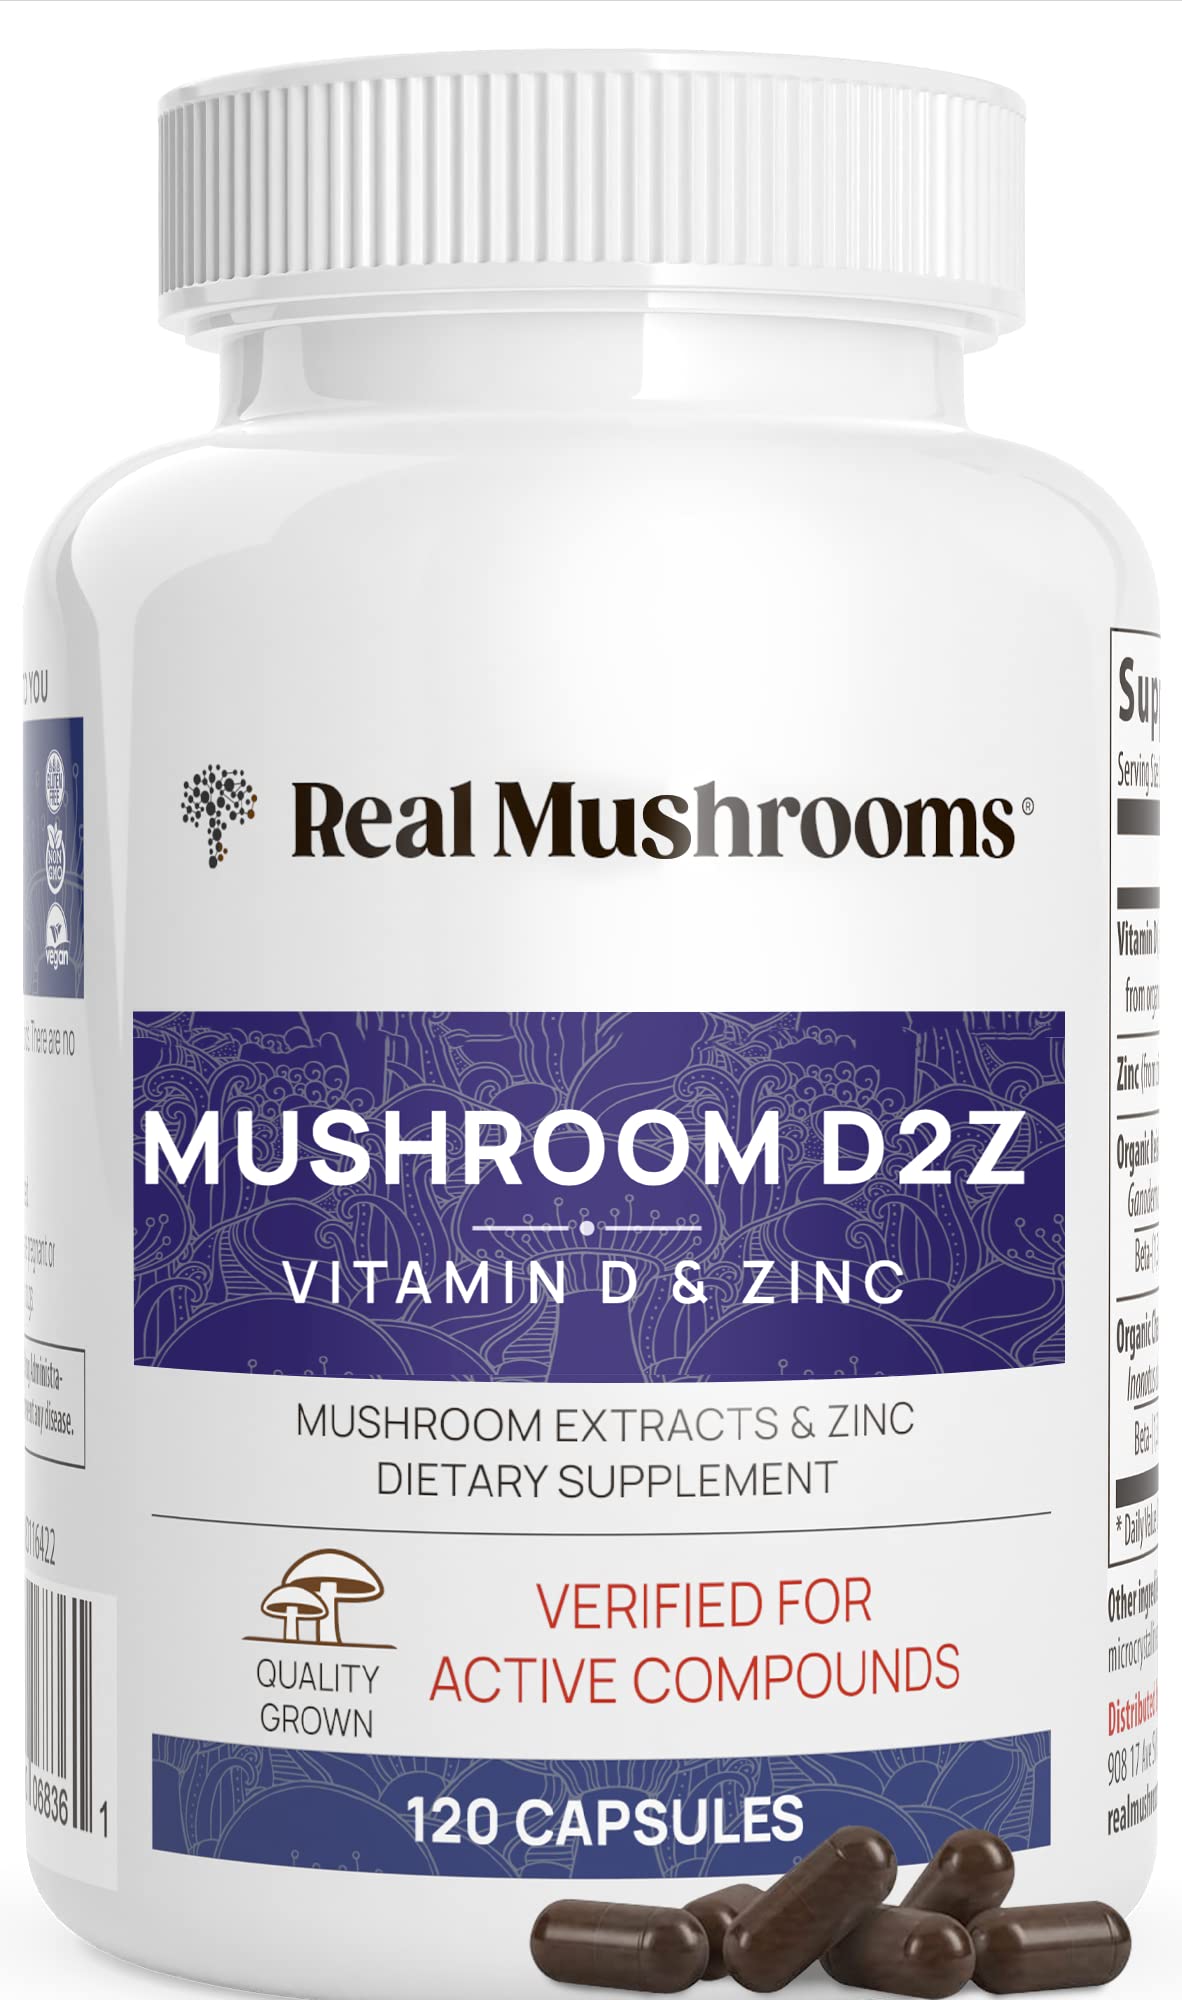 Amazon: Real Mushrooms Zinc Supplements for Adults (120ct) Vitamin D2 Immune Support with Chaga & Reishi - Vegan, Gluten-Free, Non-GMO Vitamins for Adults, After $5 Coupon $9.95